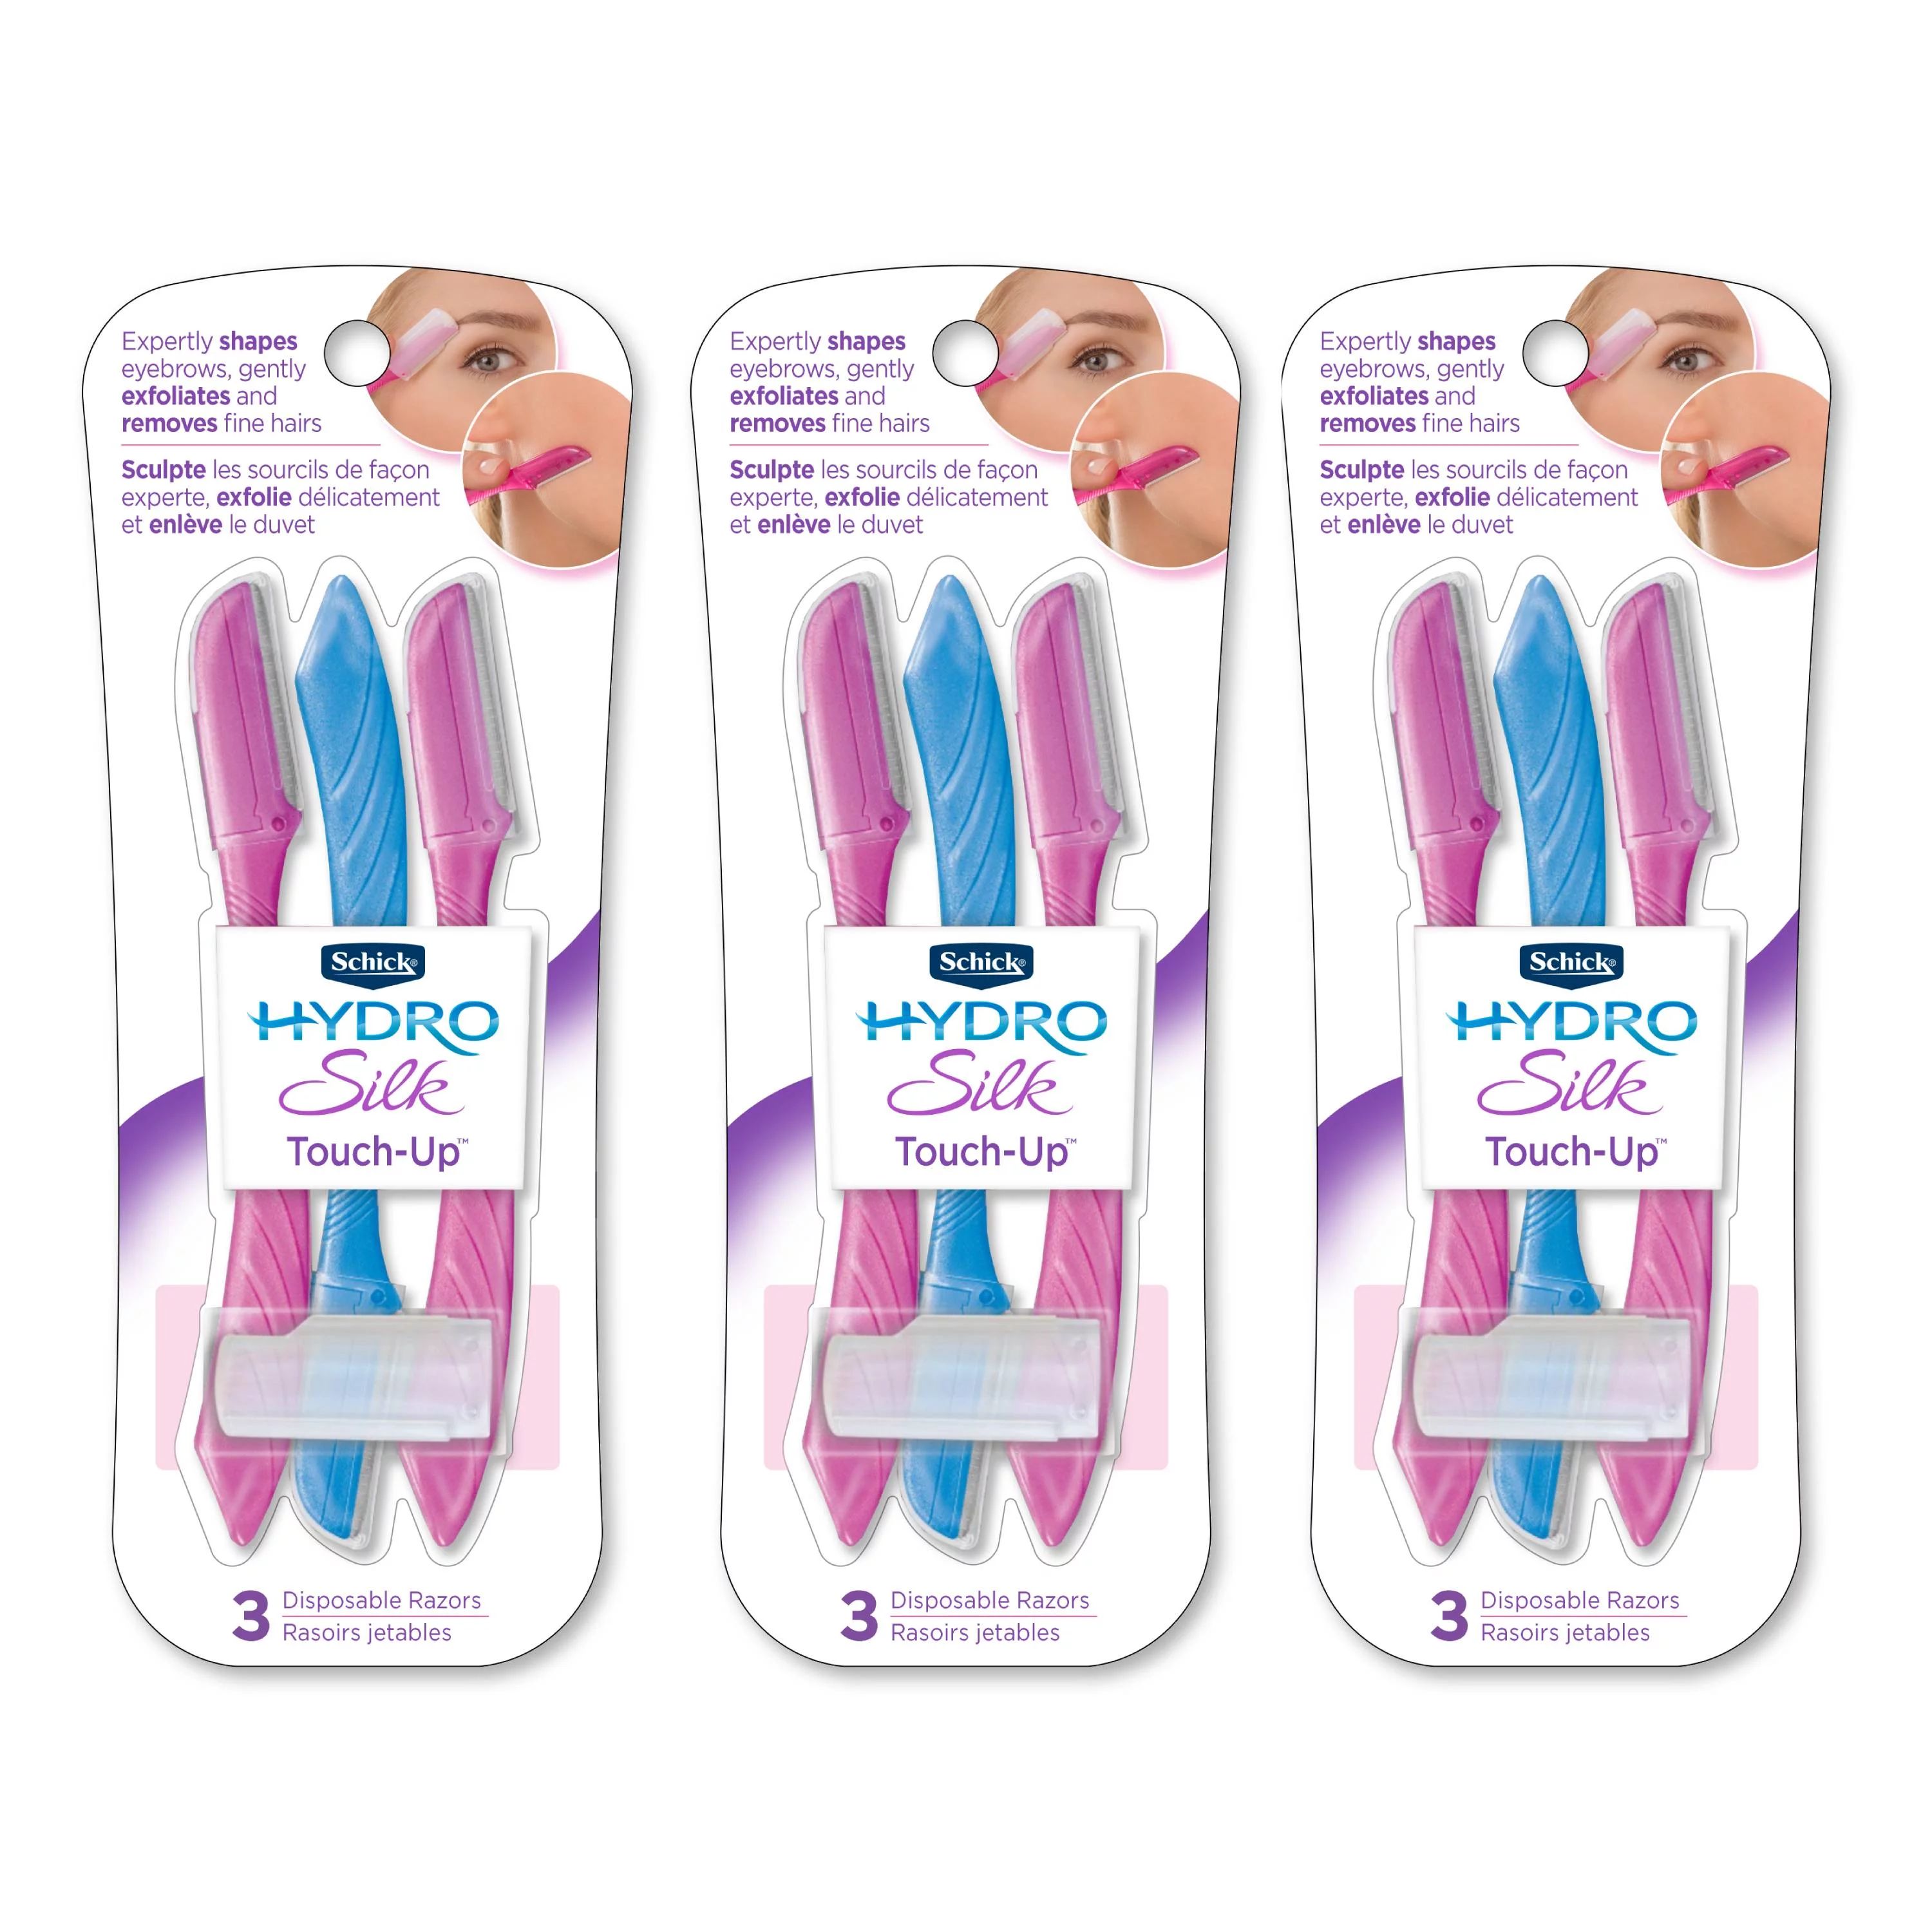 Schick Hydro Silk Touch-up Multipurpose Exfoliating Face Razor and Eyebrow Shaper with Precision ... | Walmart (US)